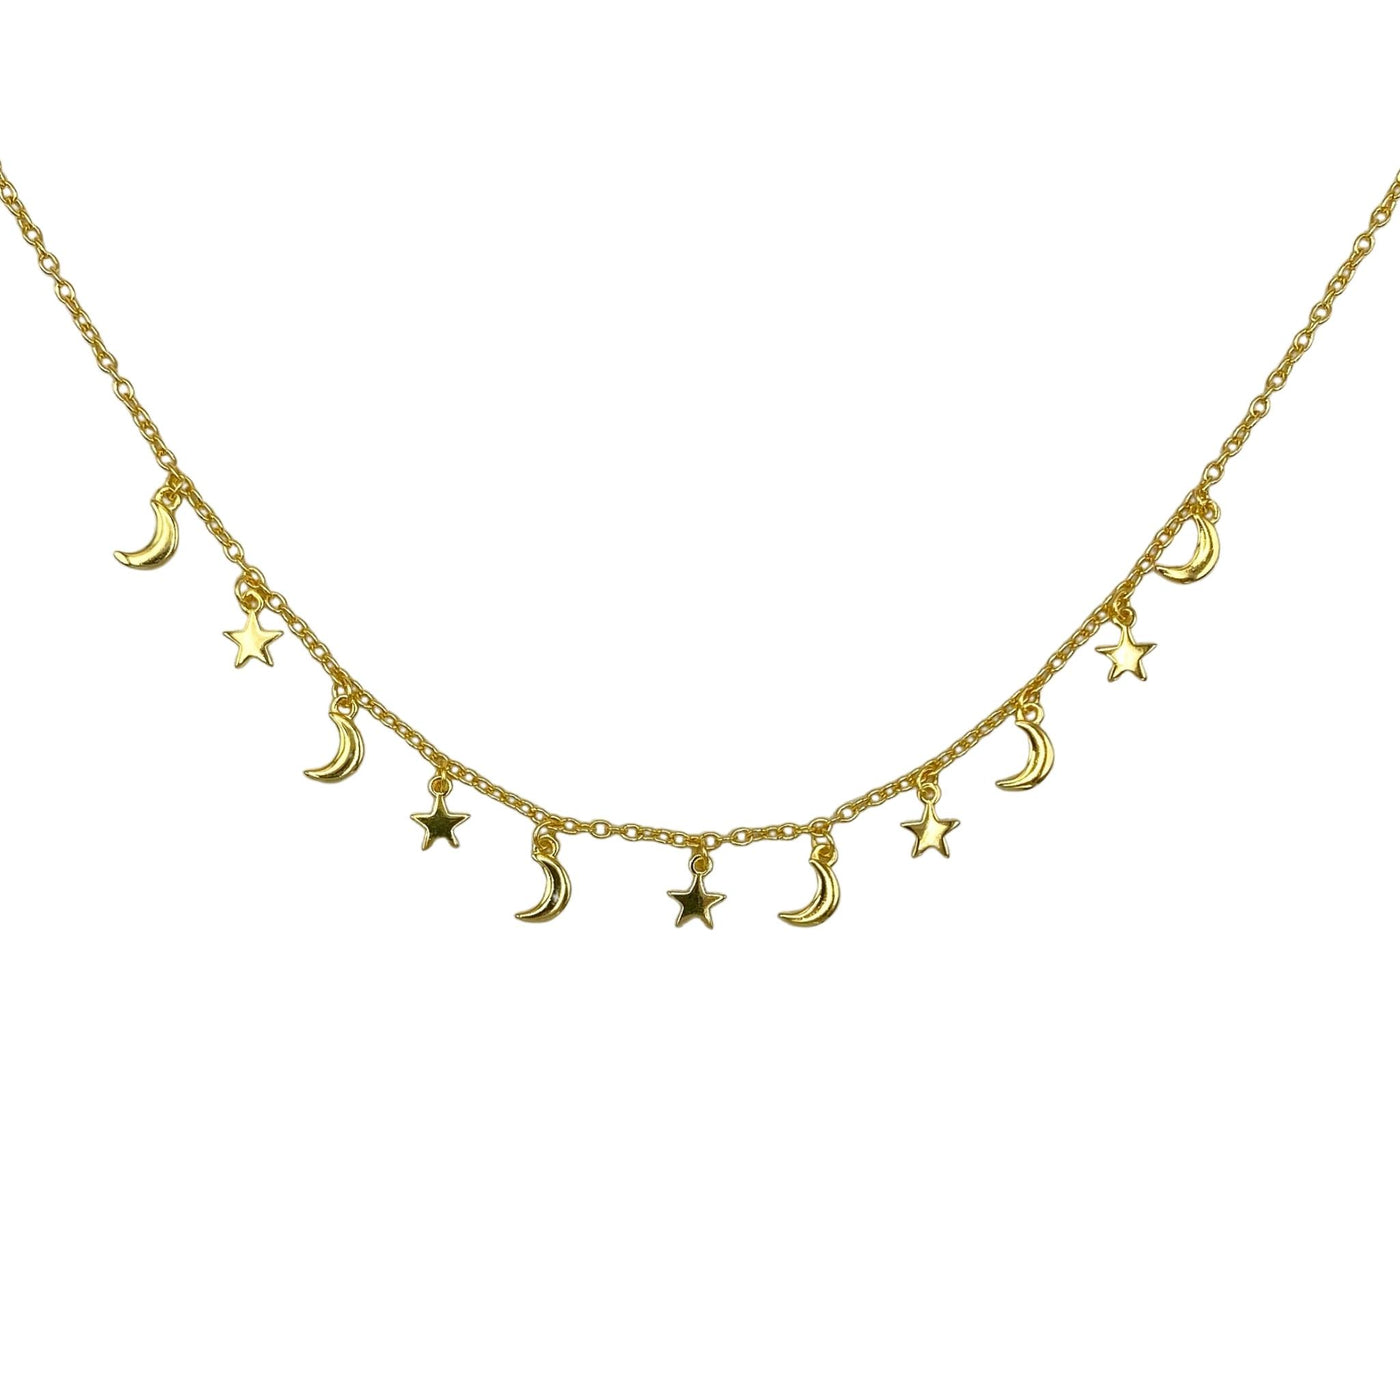 Silver charms necklace with moons and stars